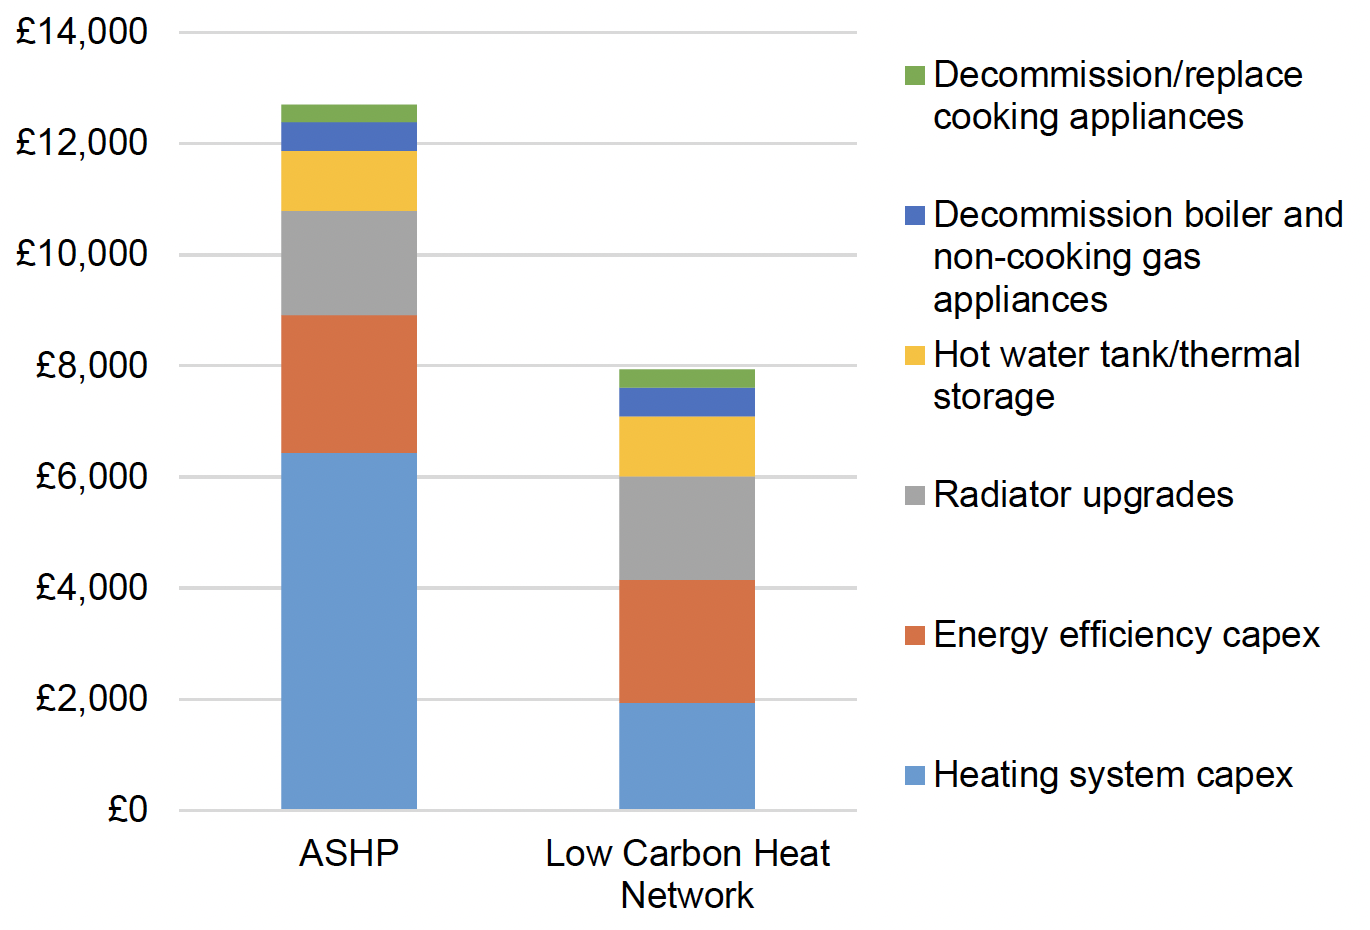 A bar chart showing the estimated total cost for a dwelling using fossil fuel heating to move to clean heating, either ASHP or a Low Carbon Heat Network. Costs included are the heating system itself, energy efficiency, radiator upgrades, hot water tank/thermal storage, and decommissioning the boiler and cooking and non-cooking appliances. For the ASHP, the total cost is nearly £13,000, with the largest part coming from the ASHP itself. For the heat network, the total cost is nearly £8,000, with the heat network itself costing a little under £2,000.